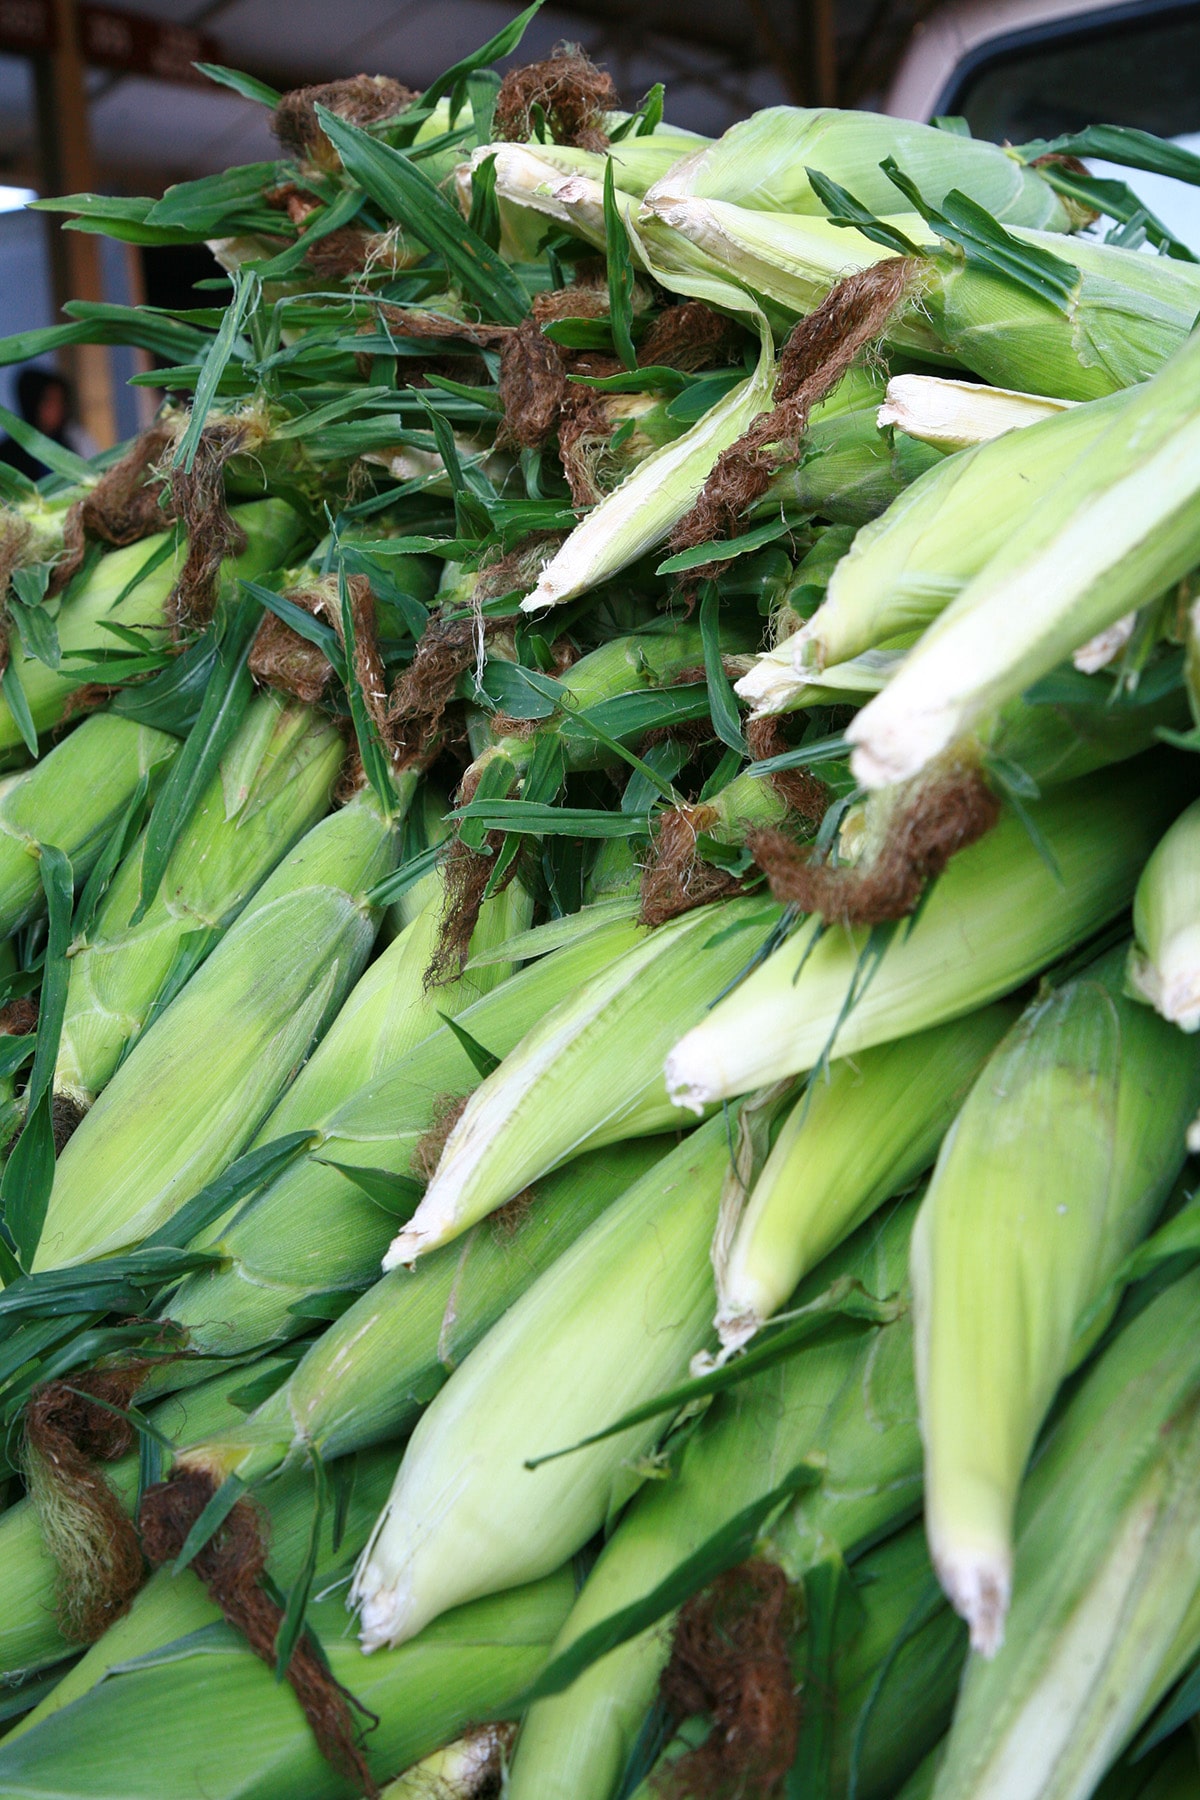 A large pile of fresh corn on the cob, on a farmers market table.